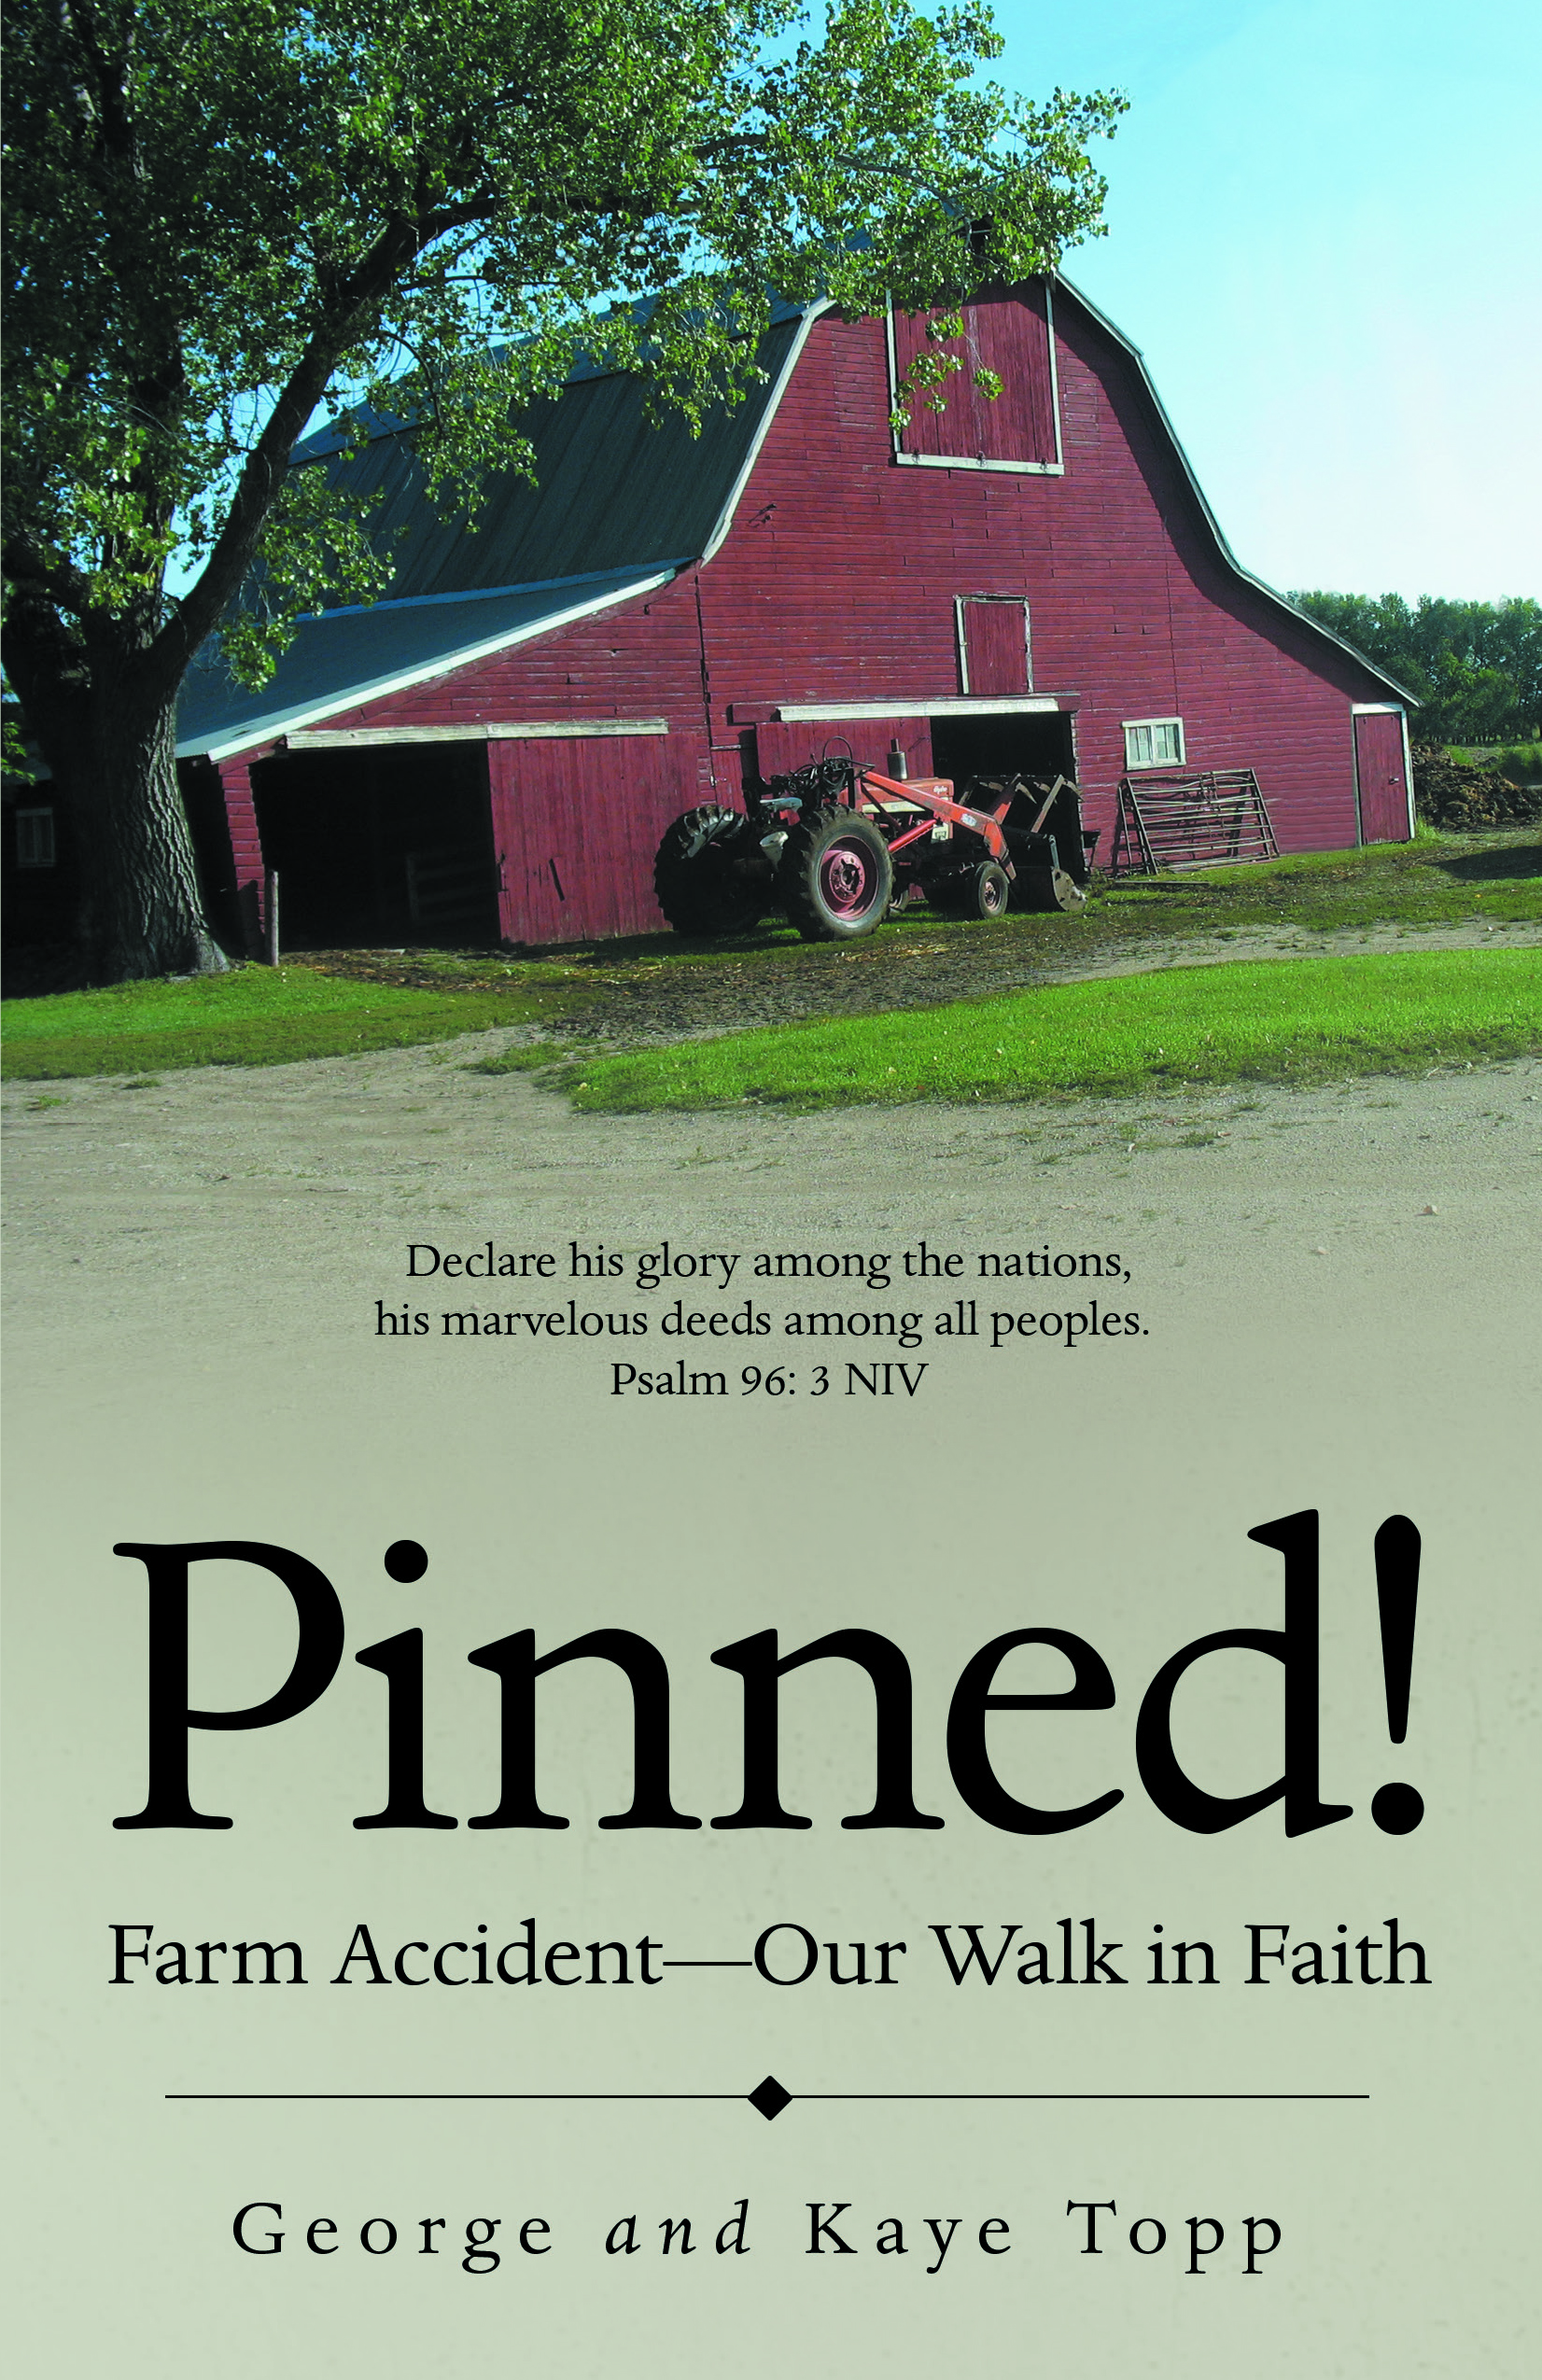 “Pinned!: Farm Accident—Our Walk in Faith”
By George and Kaye Topp